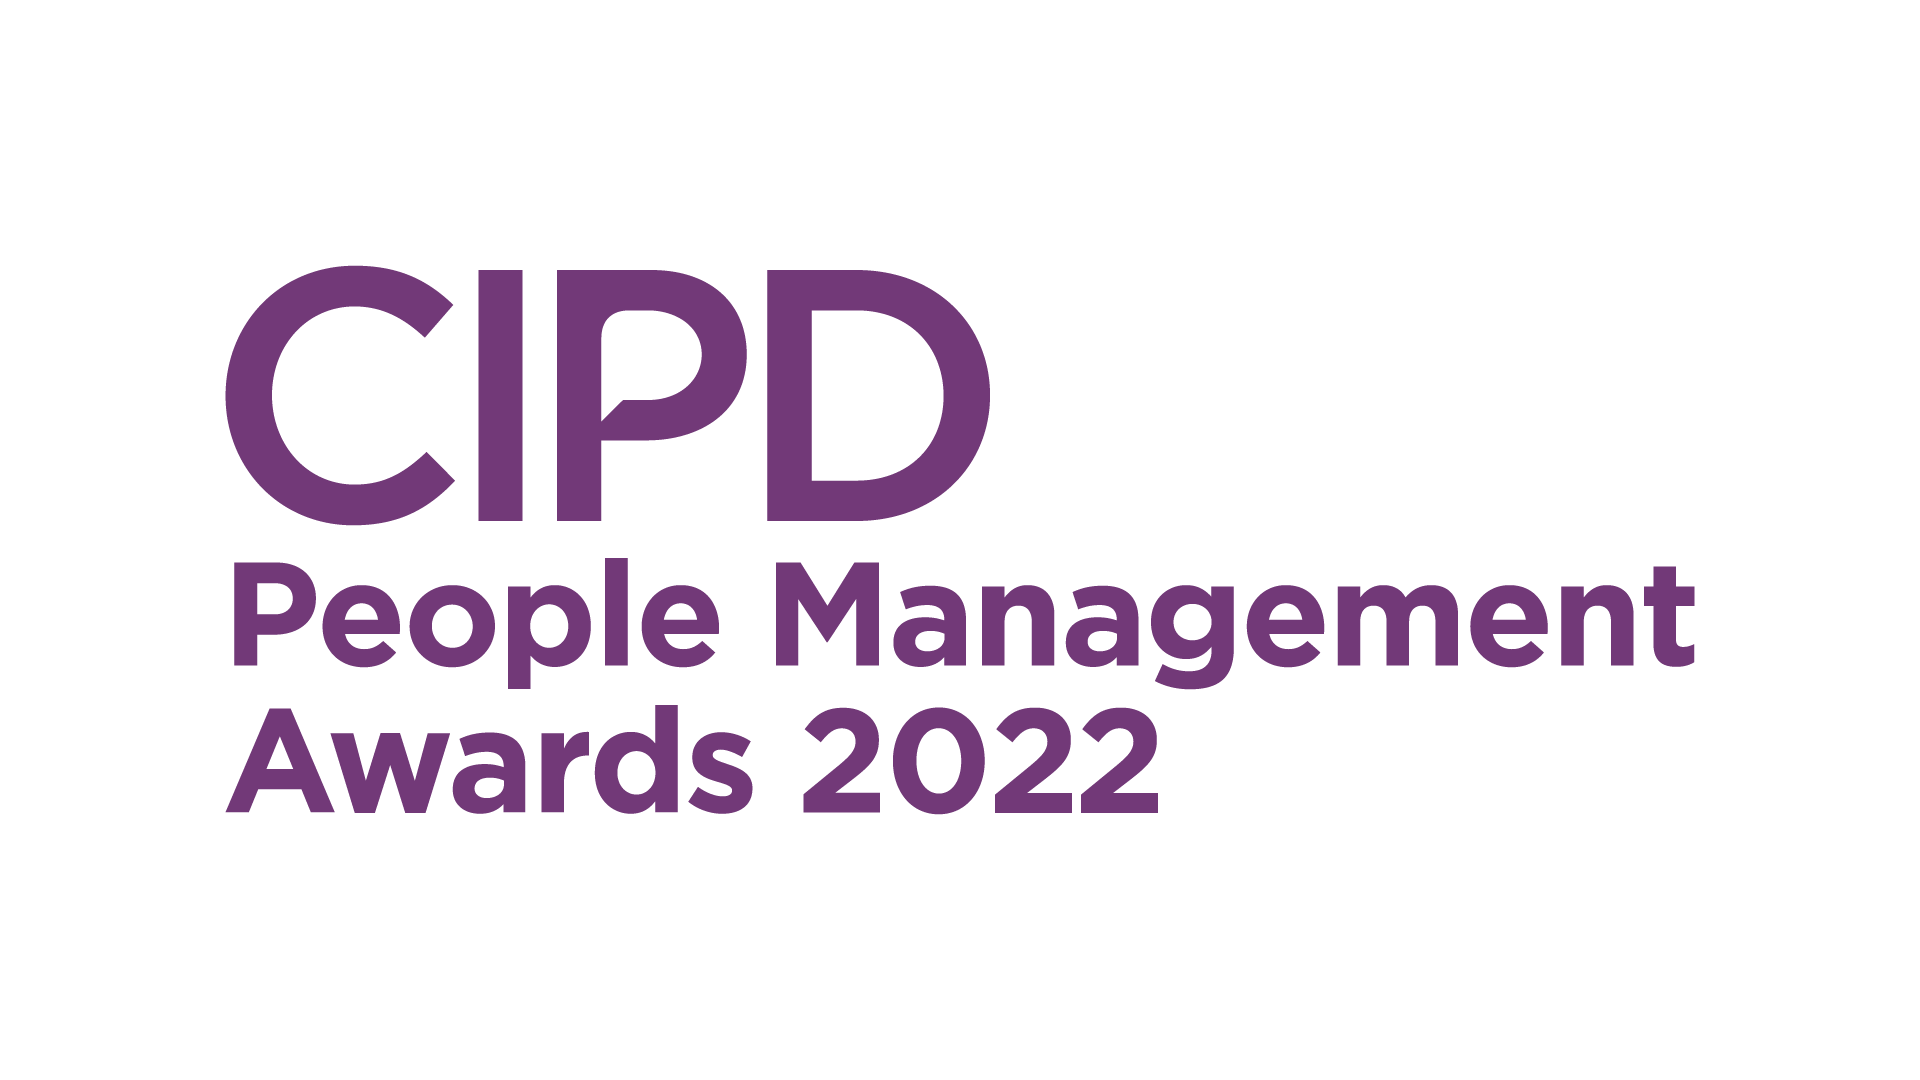 CIPD People Management Awards 2022